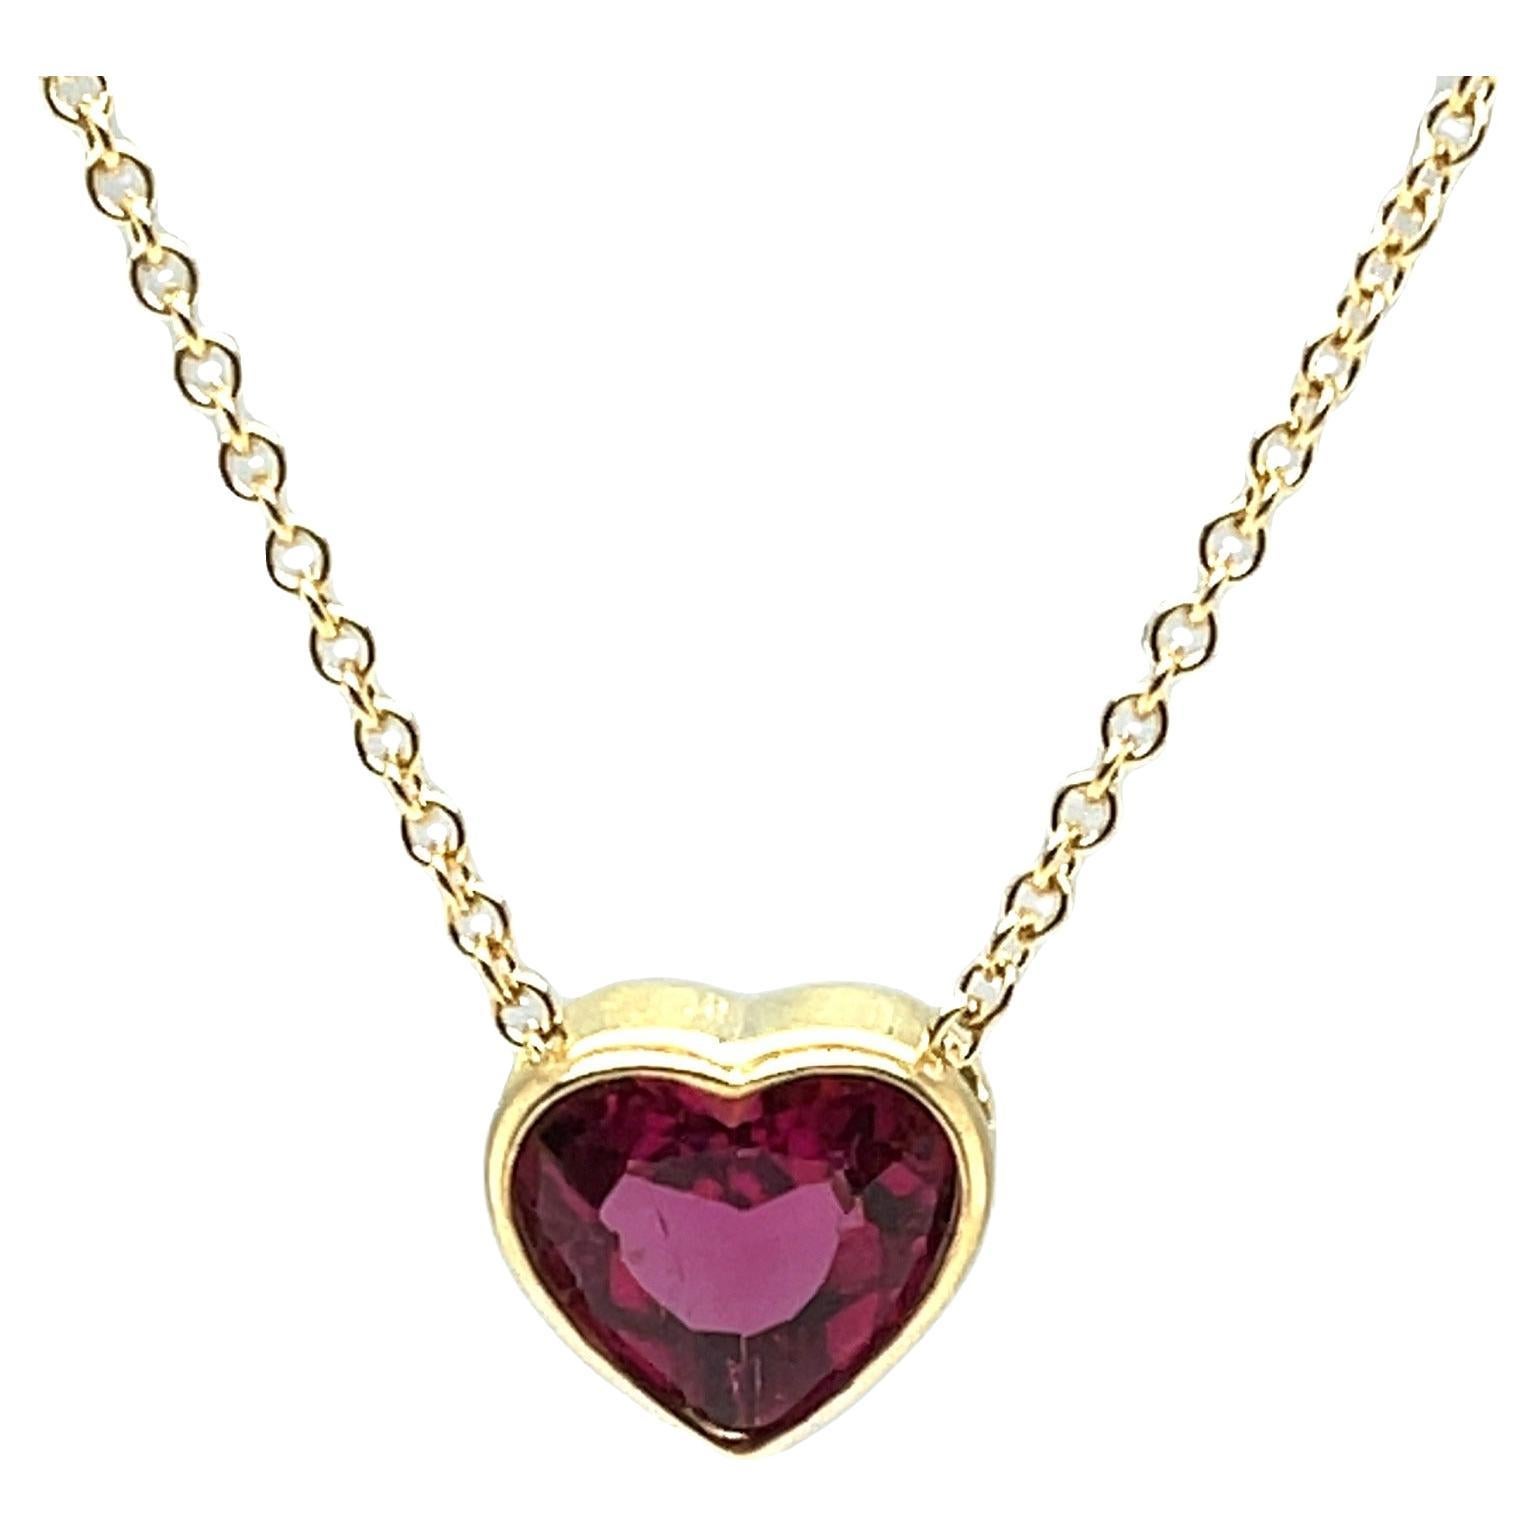 1.99 Carat Heart Shaped Pink Rubellite Tourmaline Necklace in 18k Yellow Gold For Sale